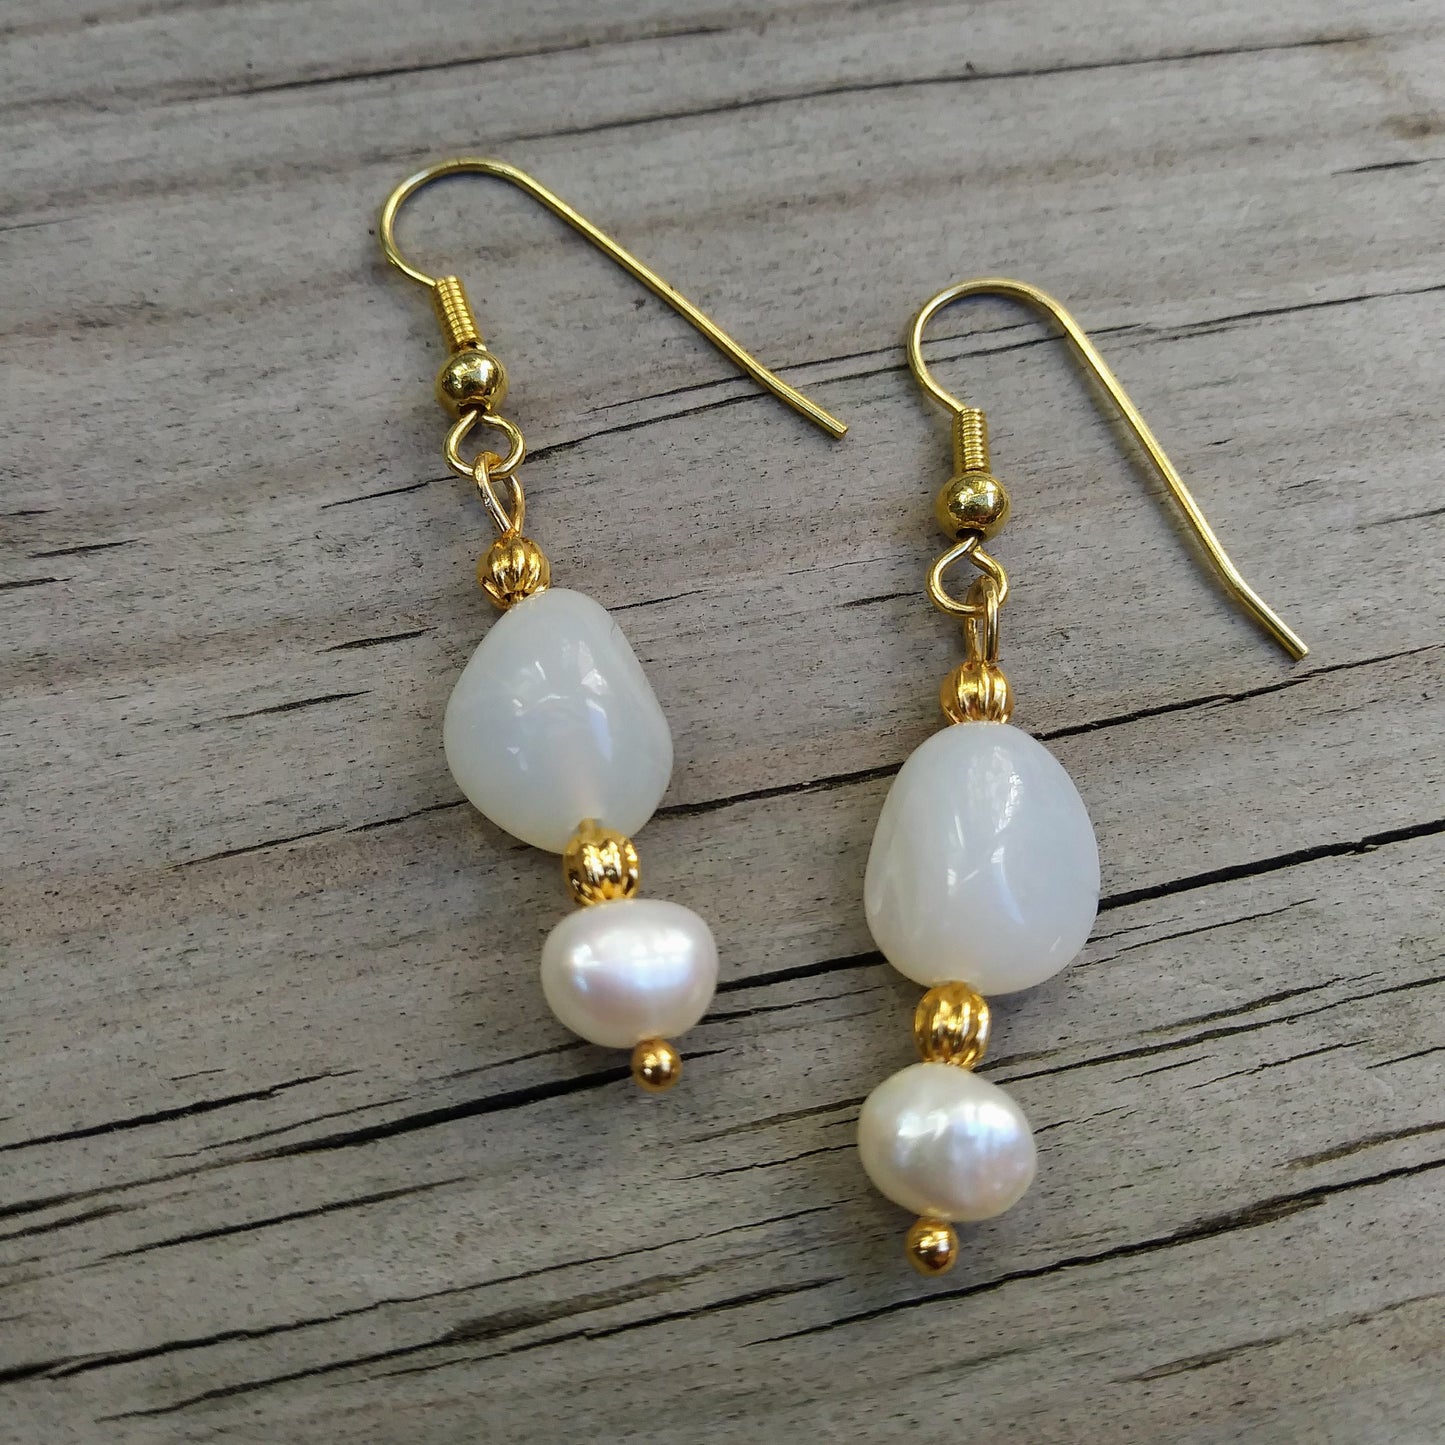 Peruvian White Opal Gold Dangle Earrings with Pearl Accents